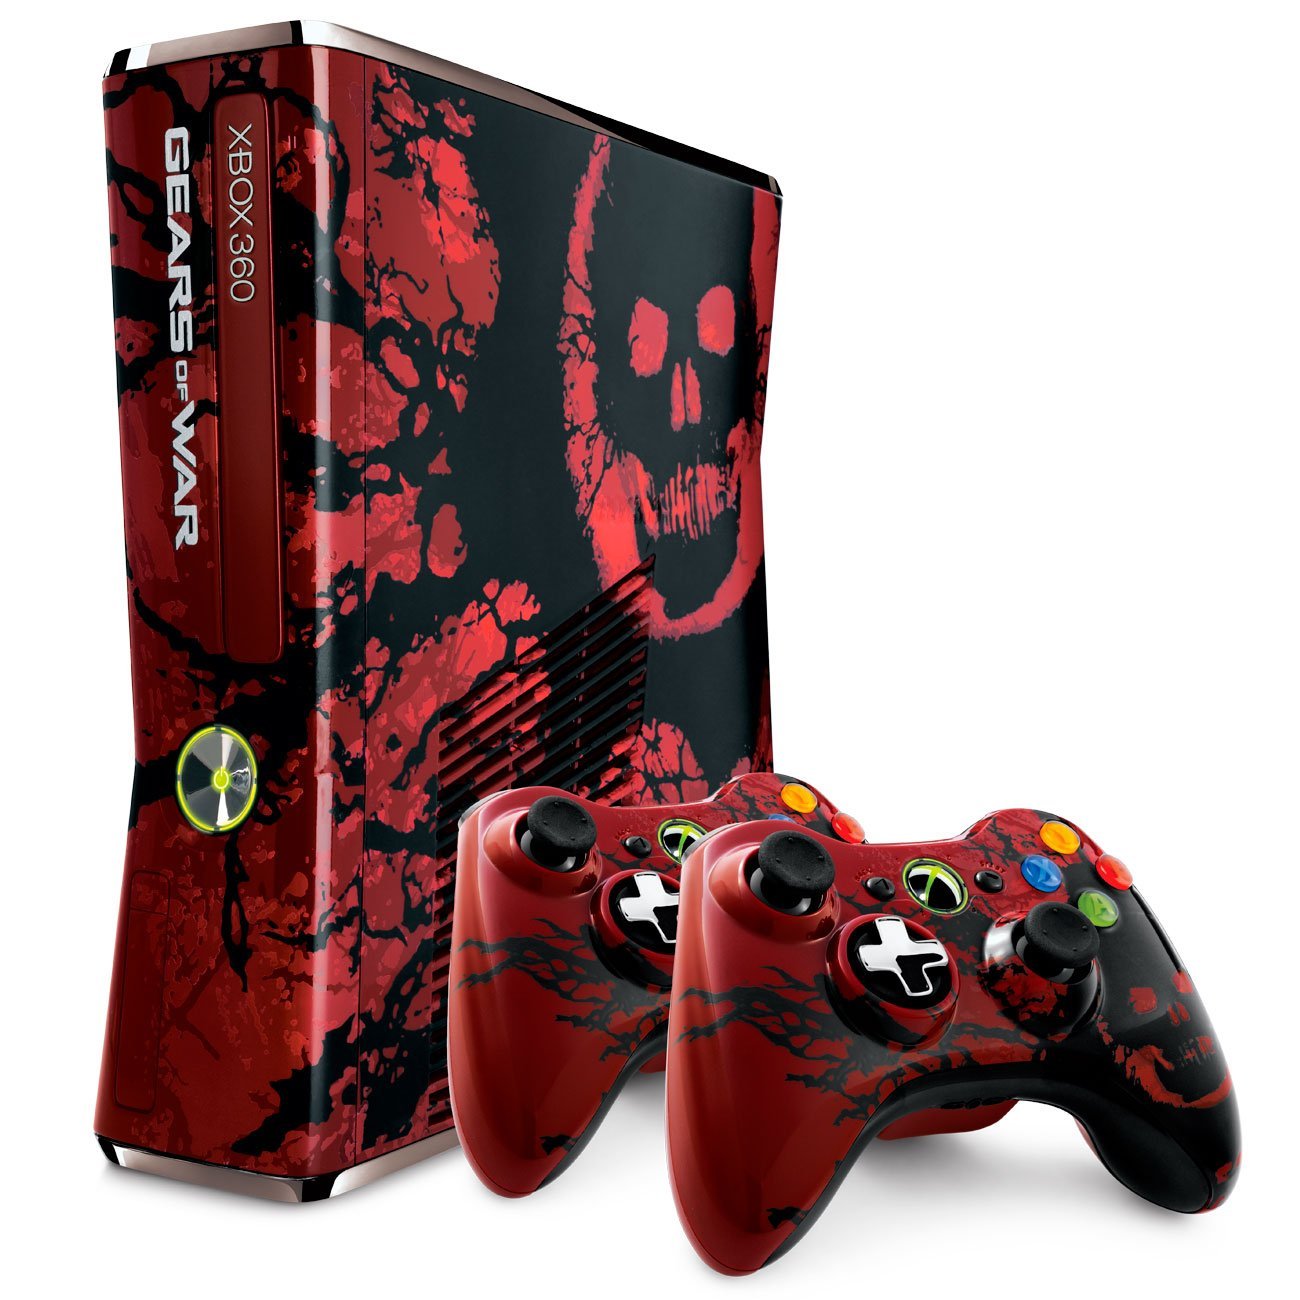 http://thetechjournal.com/wp-content/uploads/images/1109/1316587267-xbox-360-console--gears-of-war-3-limited-edition-1.jpg